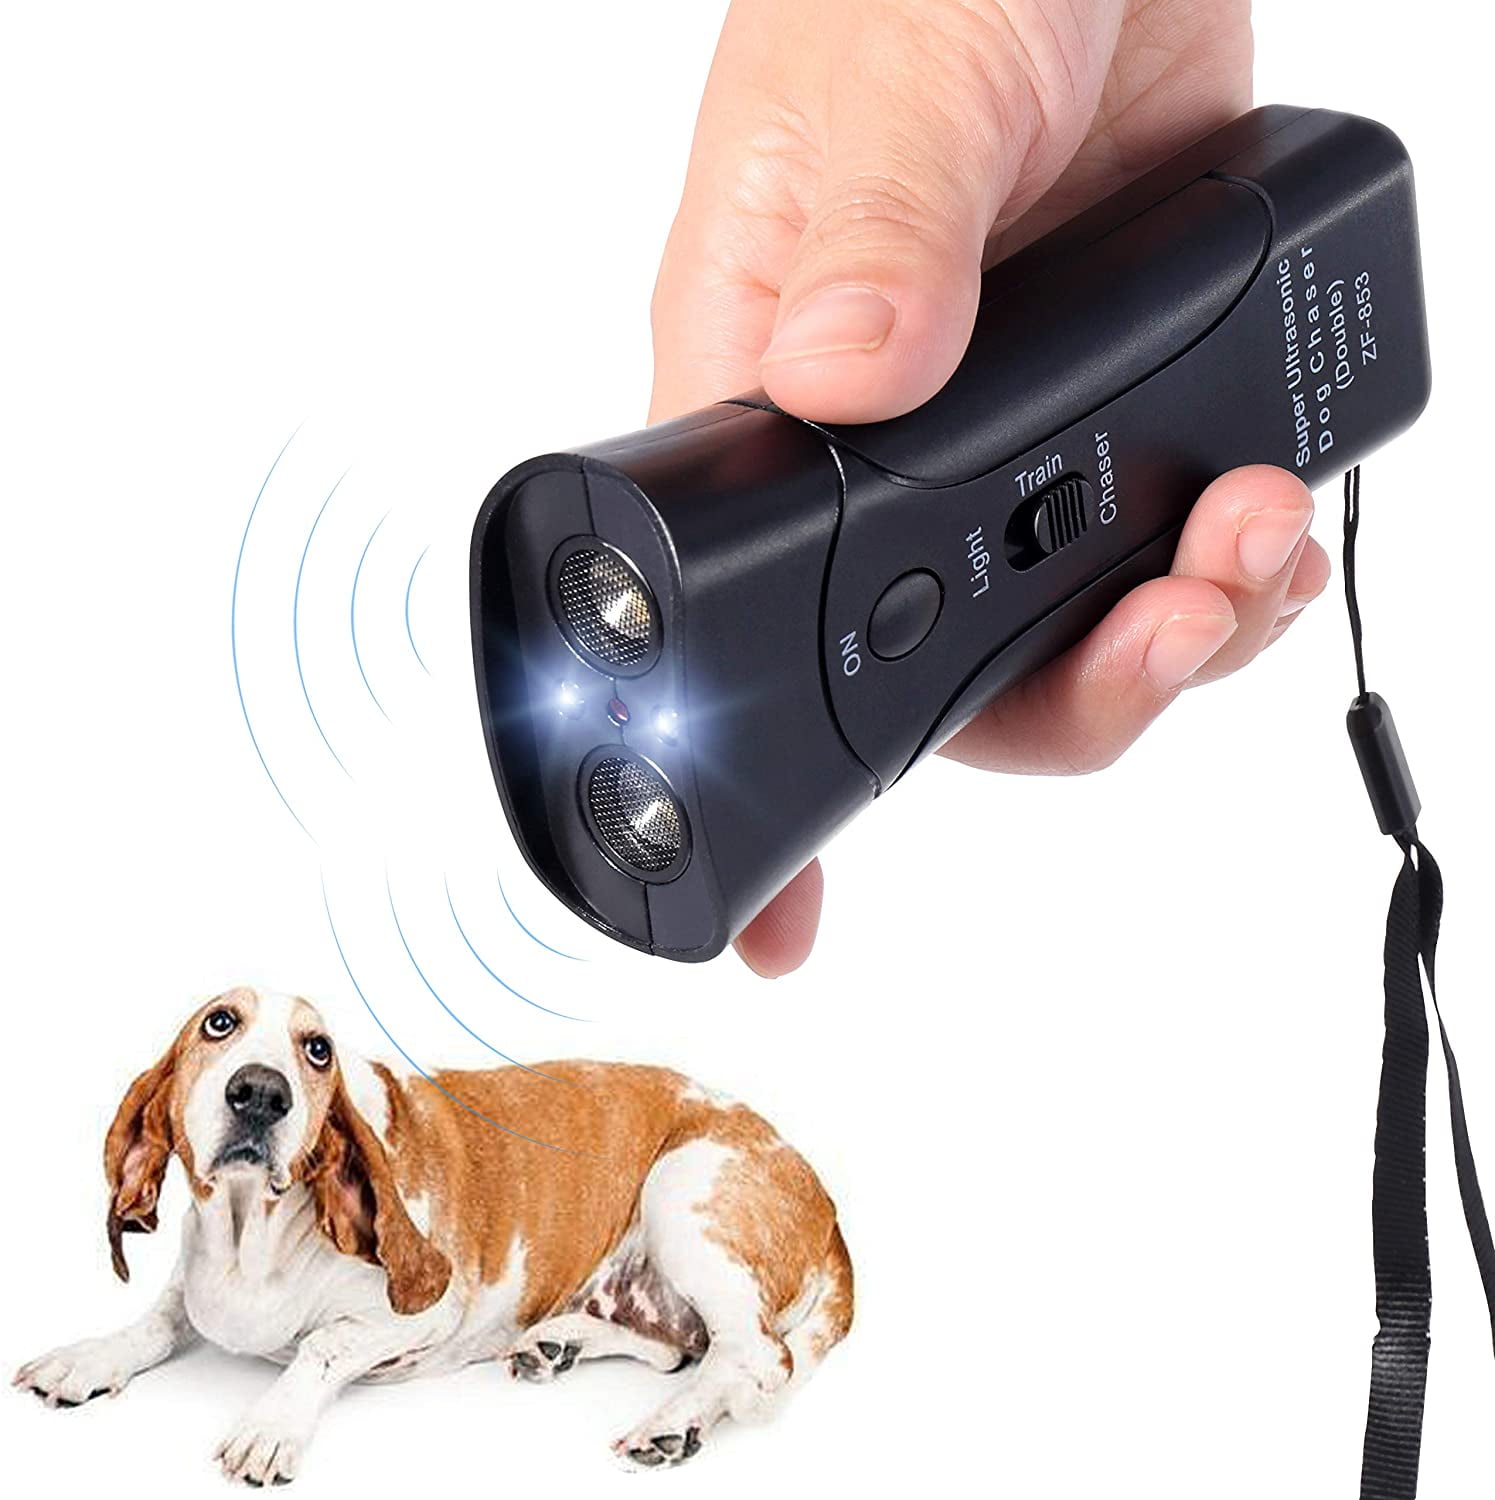 Dog Braking Control Deterrent 2 in 1 Handheld Dog Training Device Repeller Stop Barking Device with LED Indicator and Wrist Lanyard Rechargeable Ultrasonic Bark Control Device Anti Barking Device